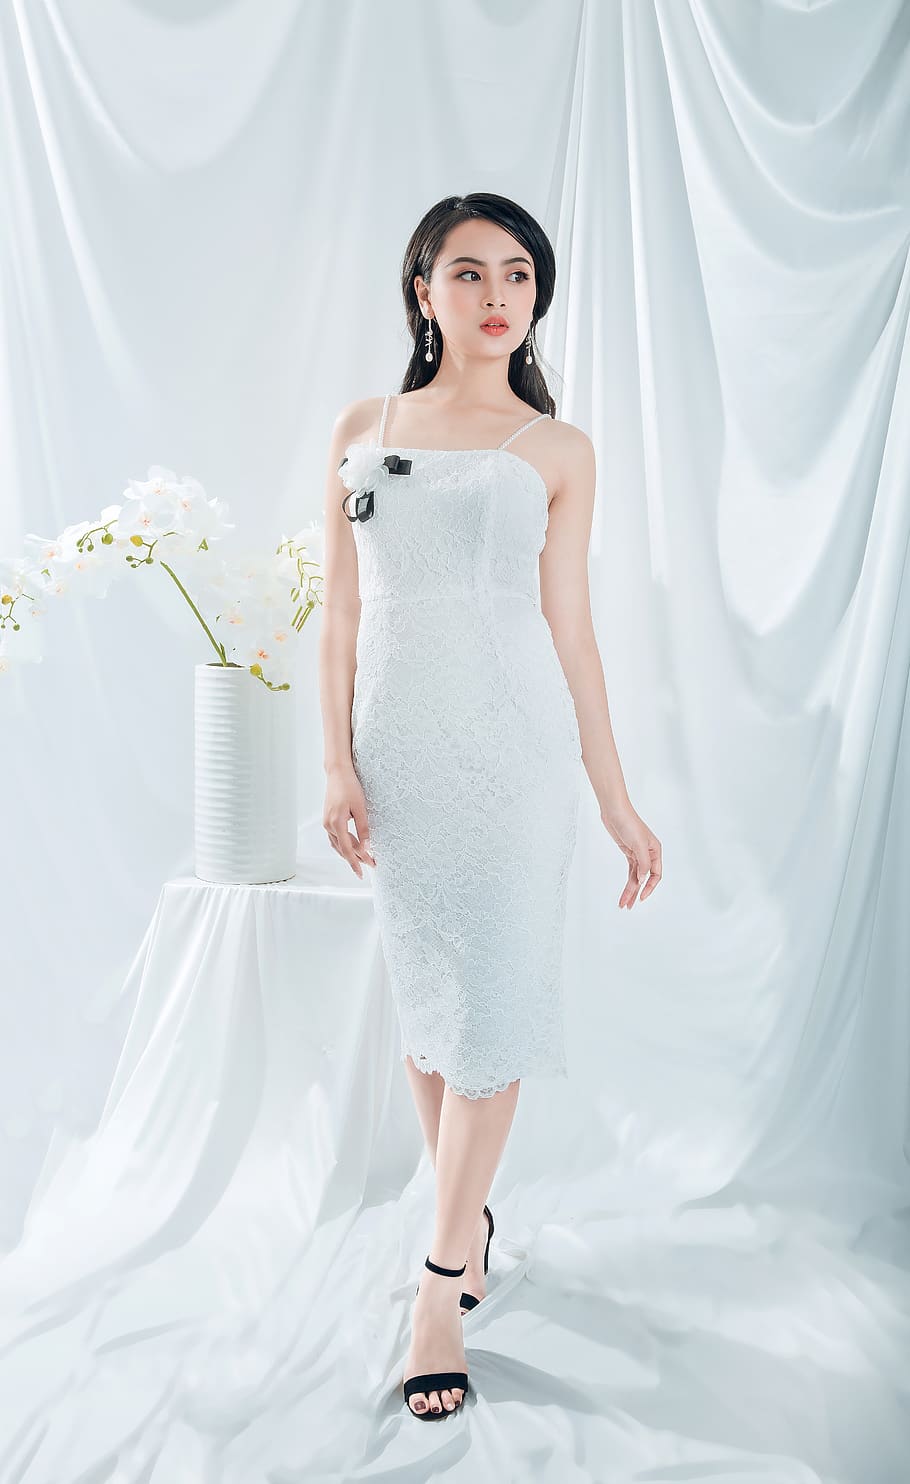 Beautiful White Gown For Girls